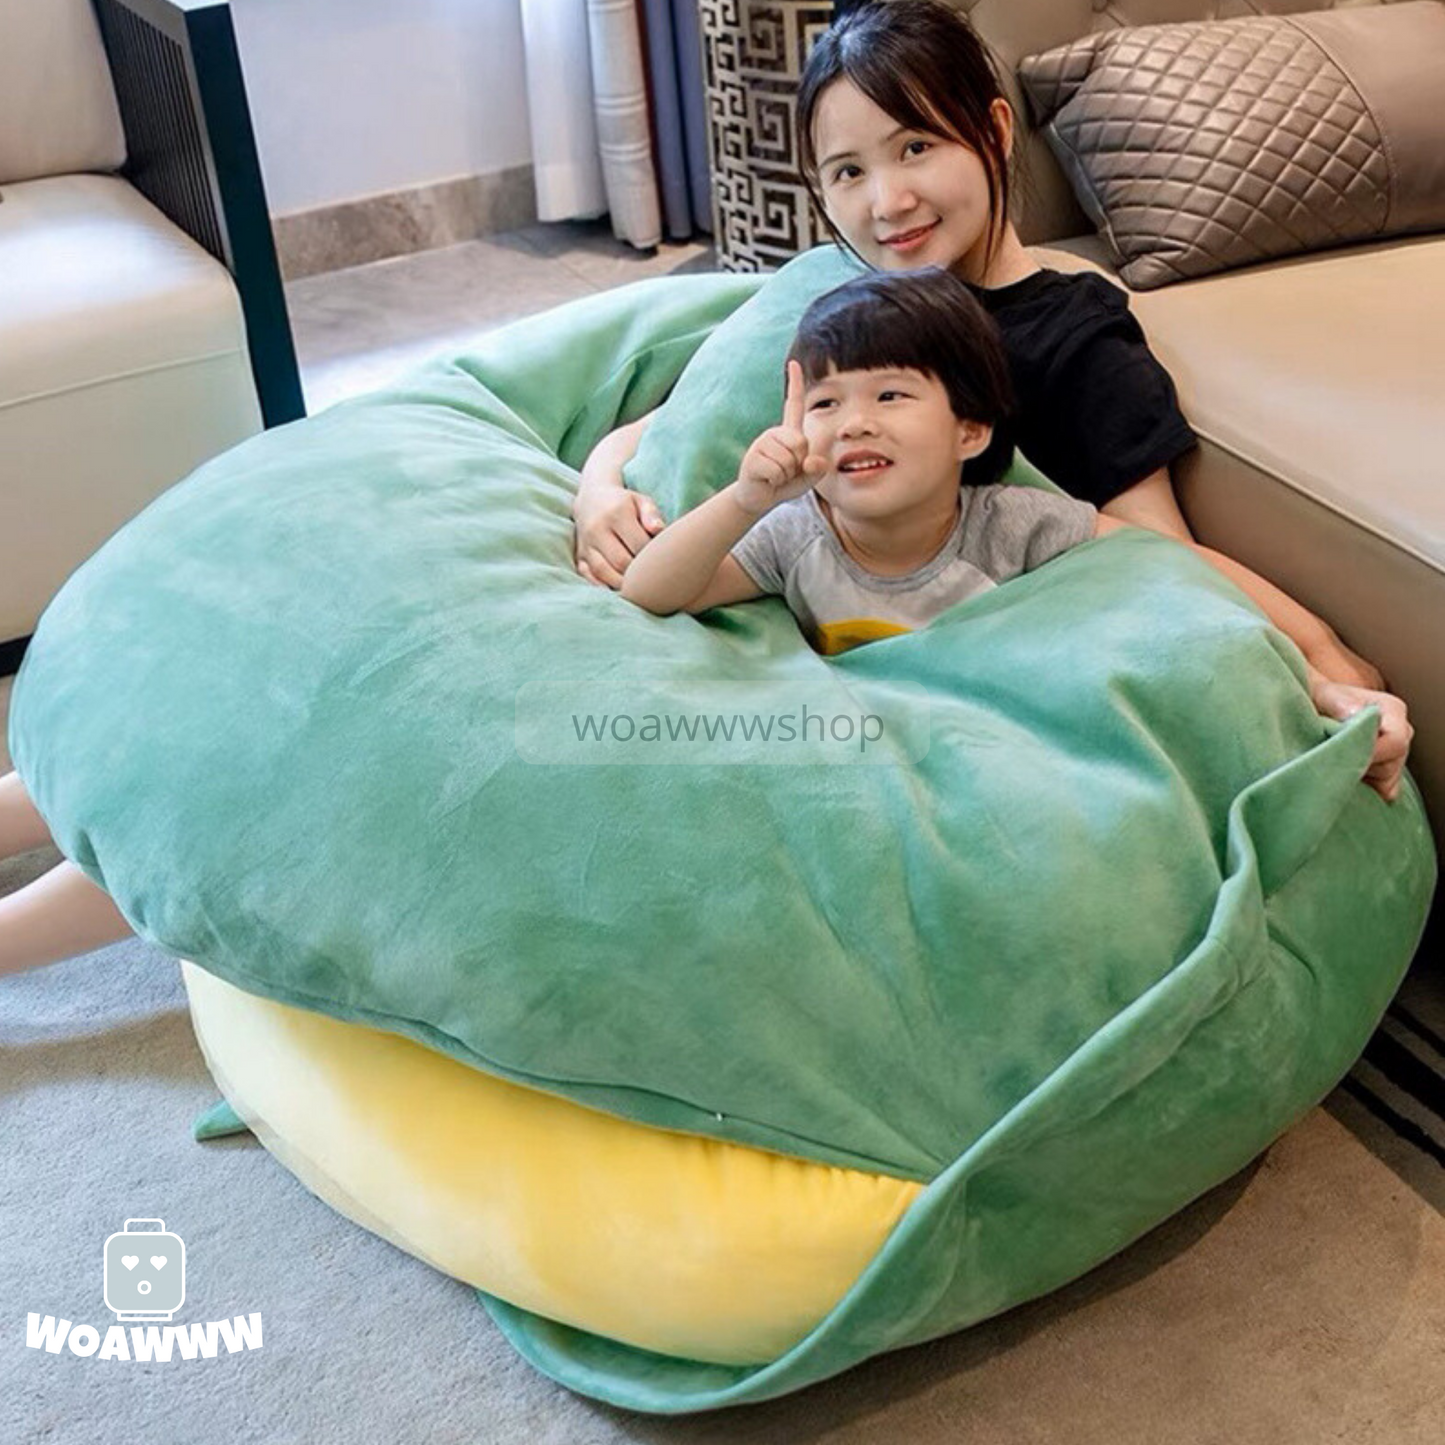 GIANT plush equippable turtle shell